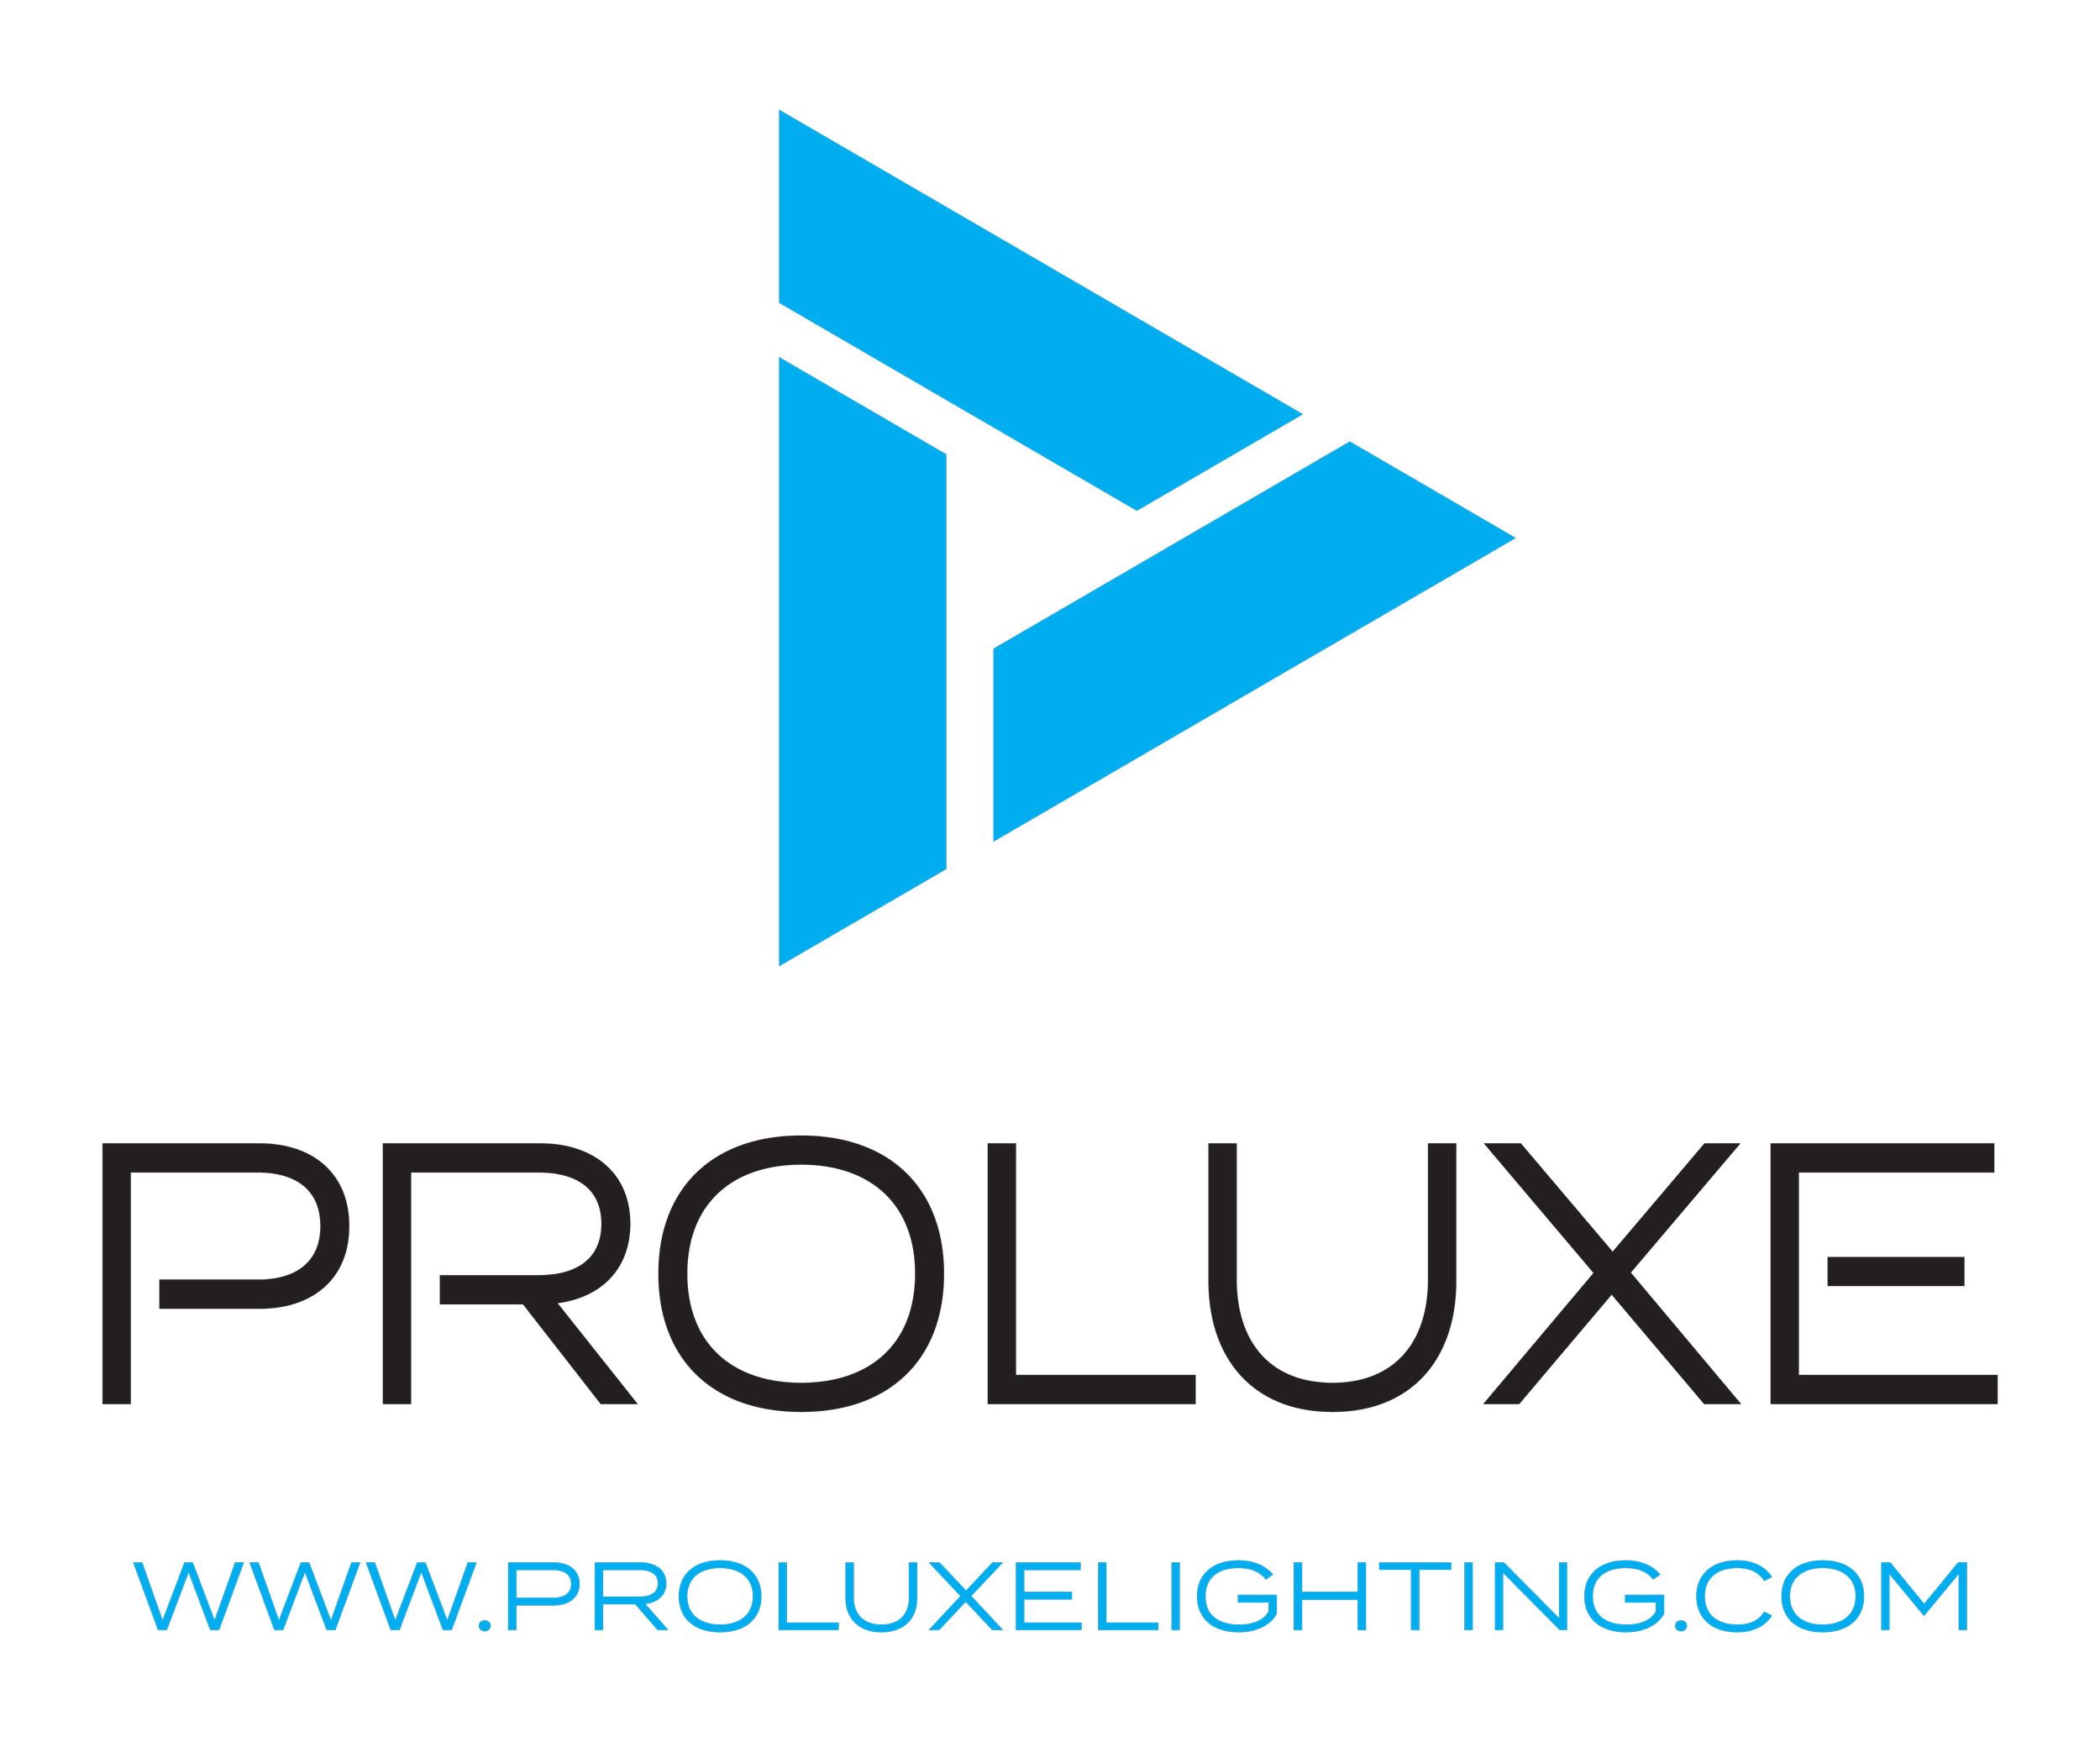 Proluxe Web Logo_Stacked.png